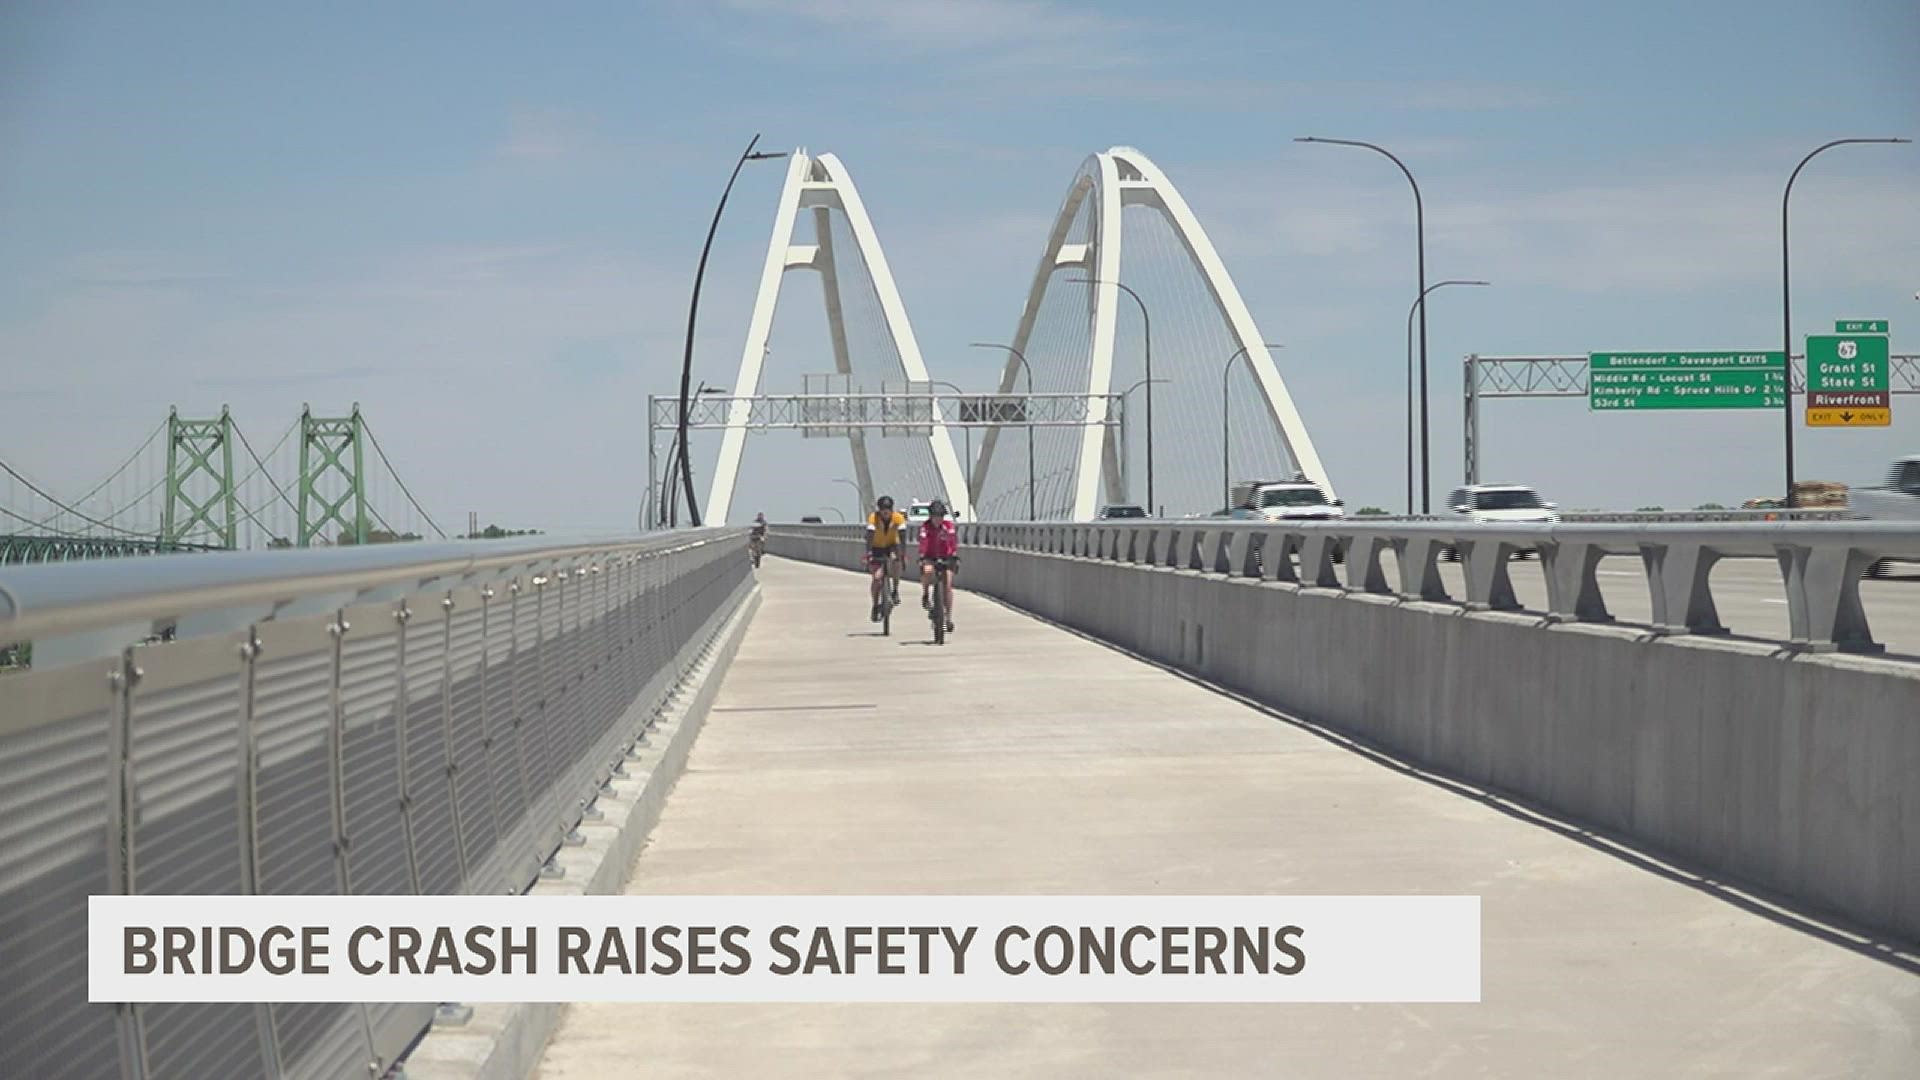 Citizens shared their reactions in the wake of the fatal incident on the I-74 Bridge pedestrian path, and many are calling for additional safety measures.